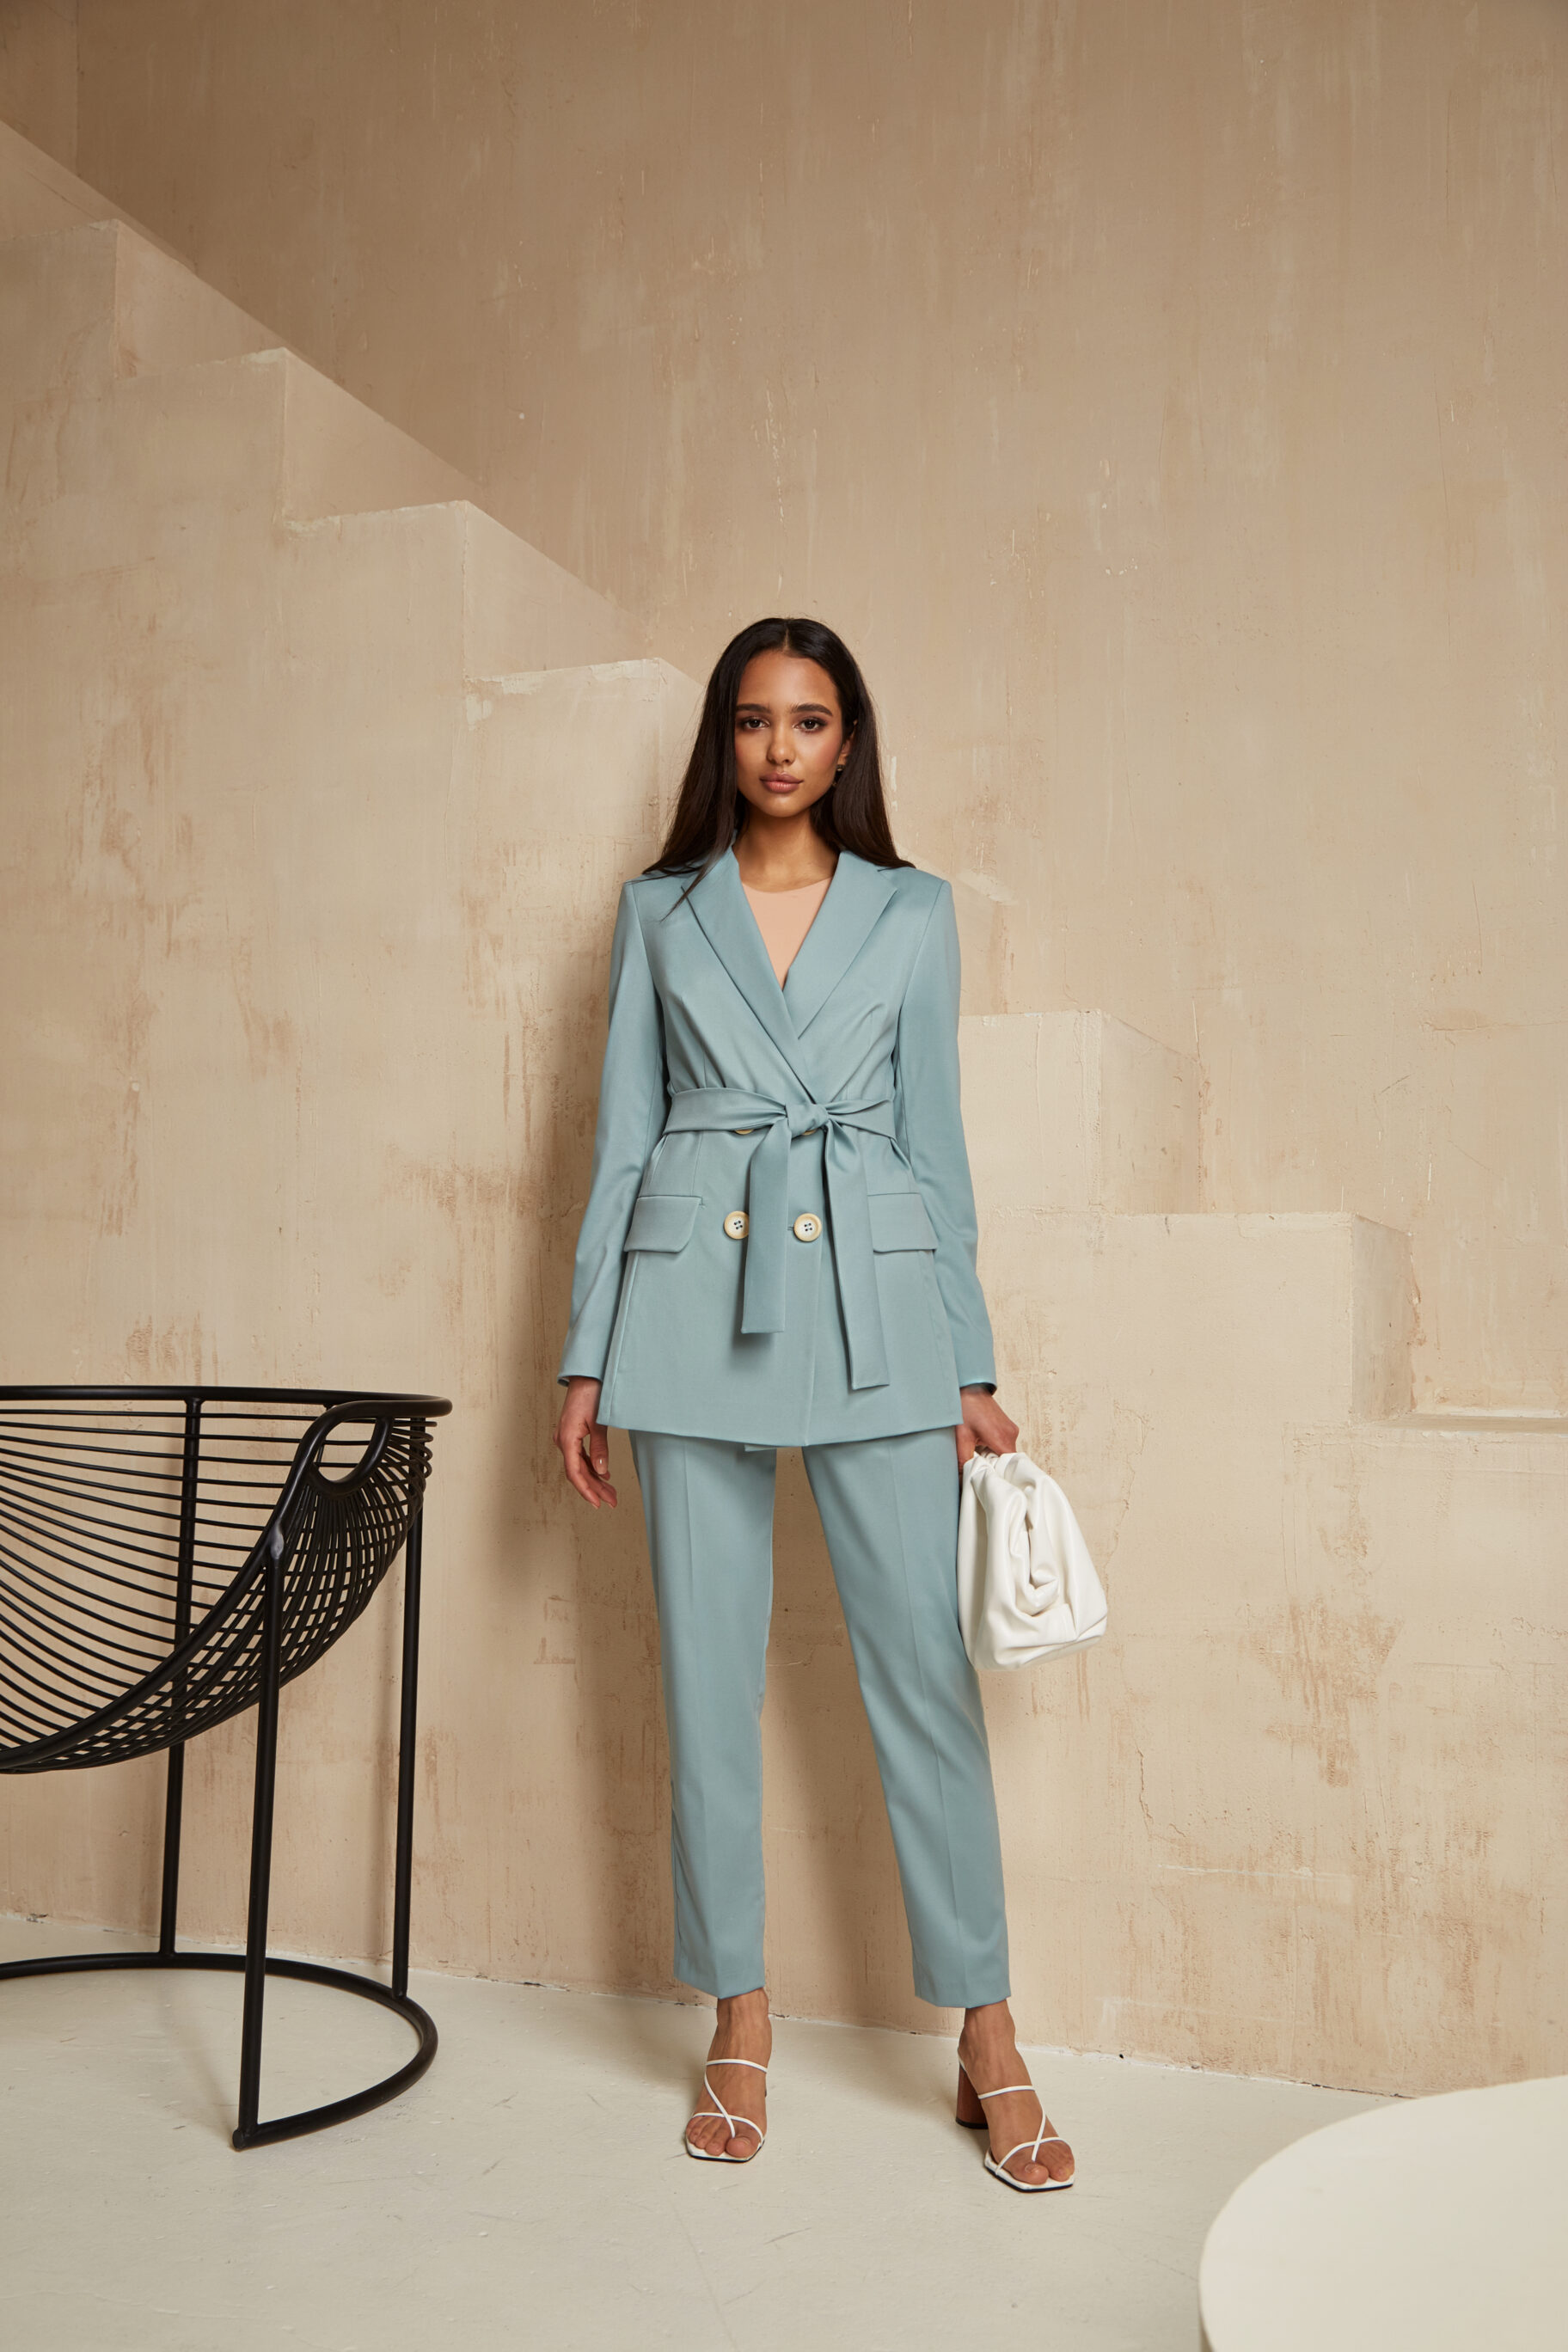 Mint Suit With White Handbag And High Heels